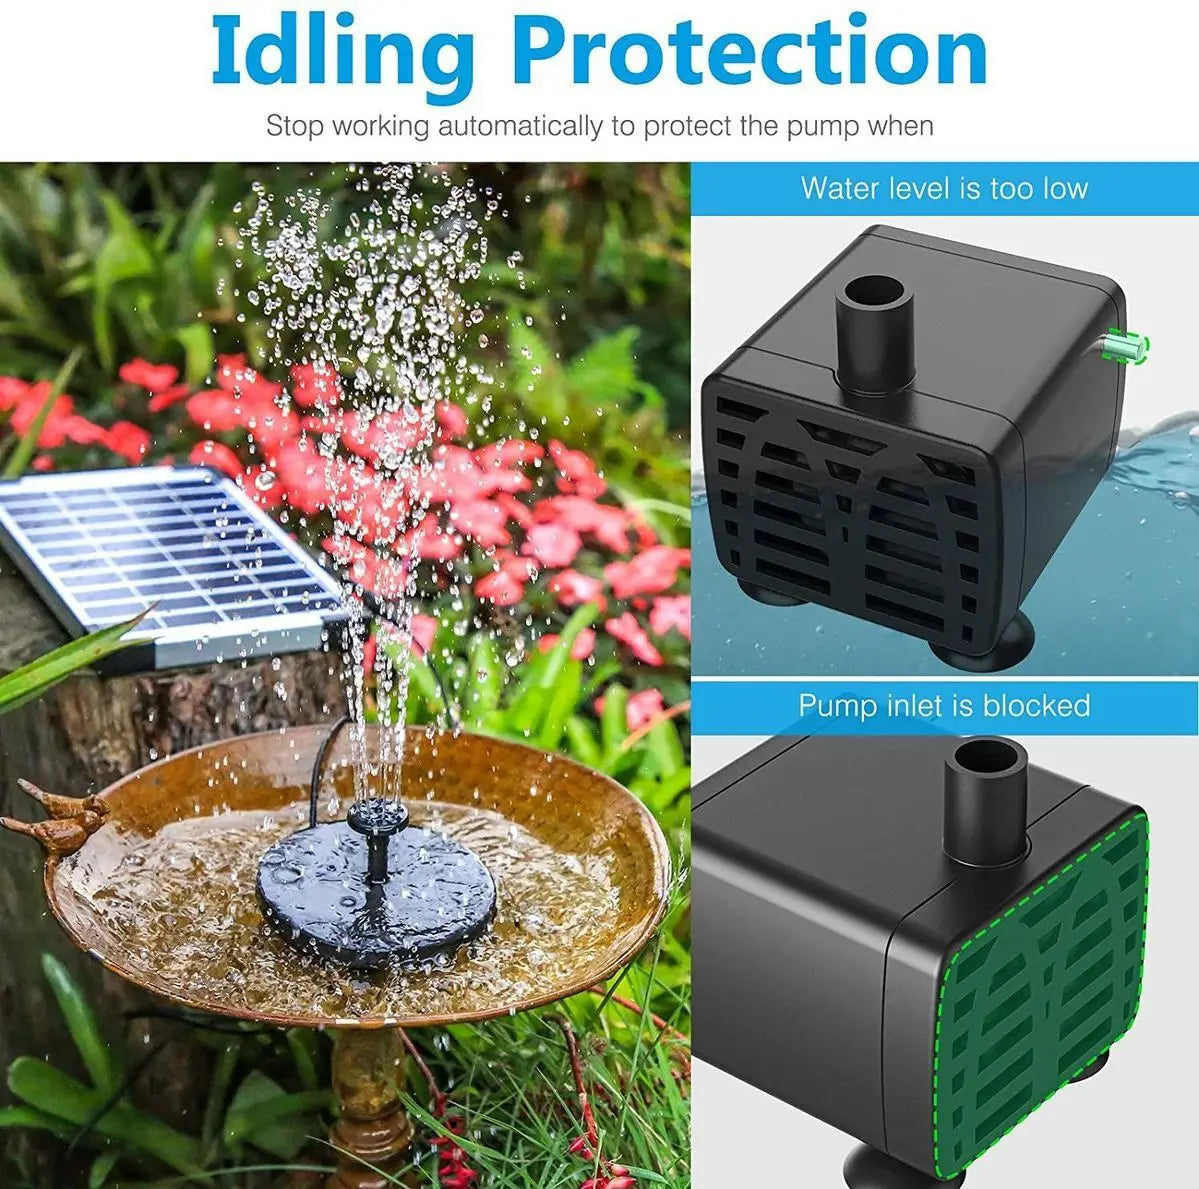 12V Solar Panel Charging Water Pump Set, Automatic shut-off prevents pump damage and idling due to low water levels or blockages.